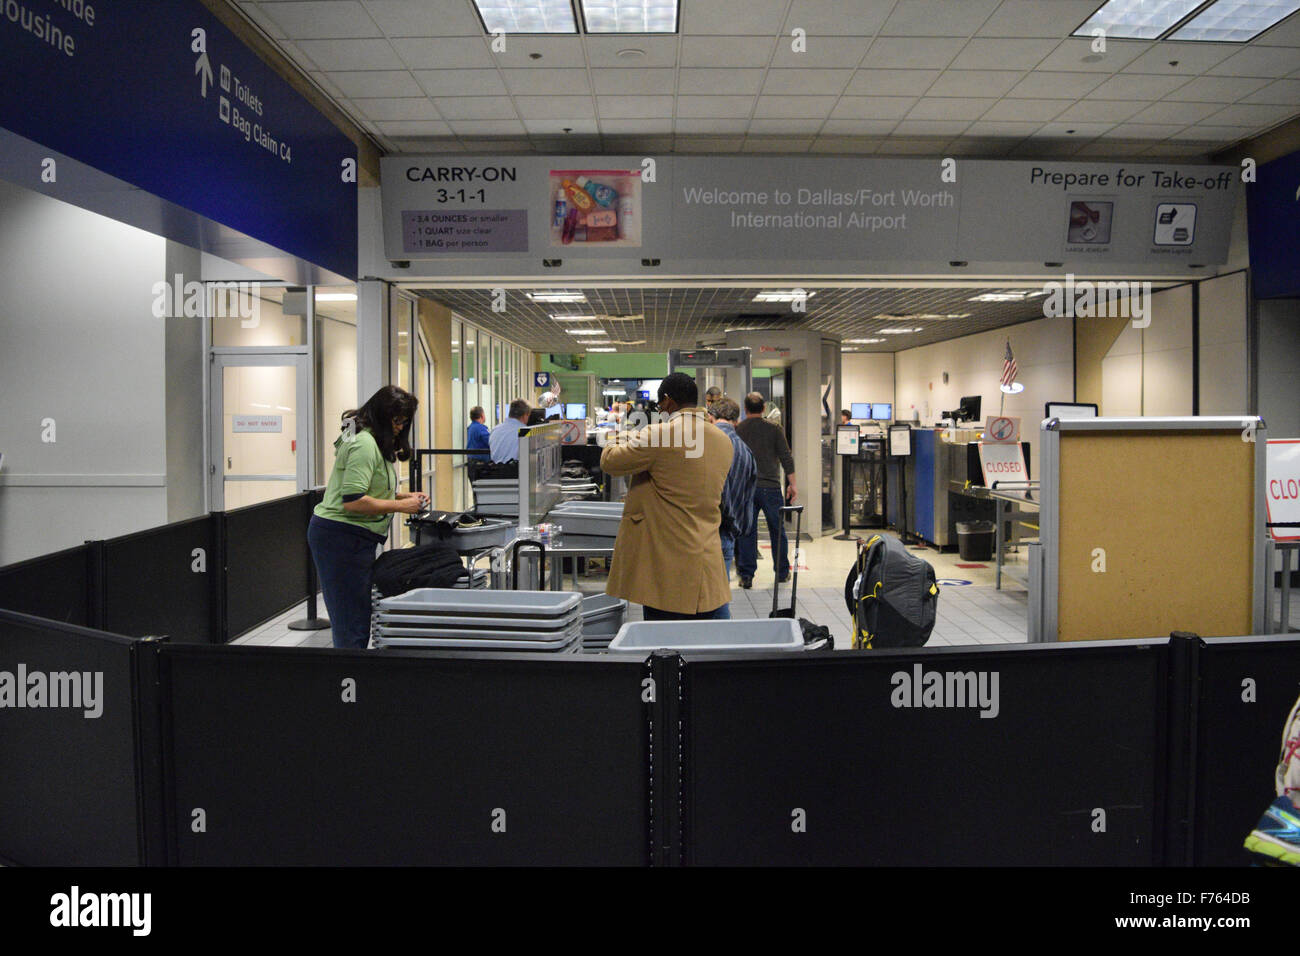 Dallas, Texas, USA. 25th Nov, 2015. TSA agents at DFW International Airport in Dallas checking passengers before they enter the airport concourse. Credit:  Brian T. Humek/Alamy Live News Stock Photo